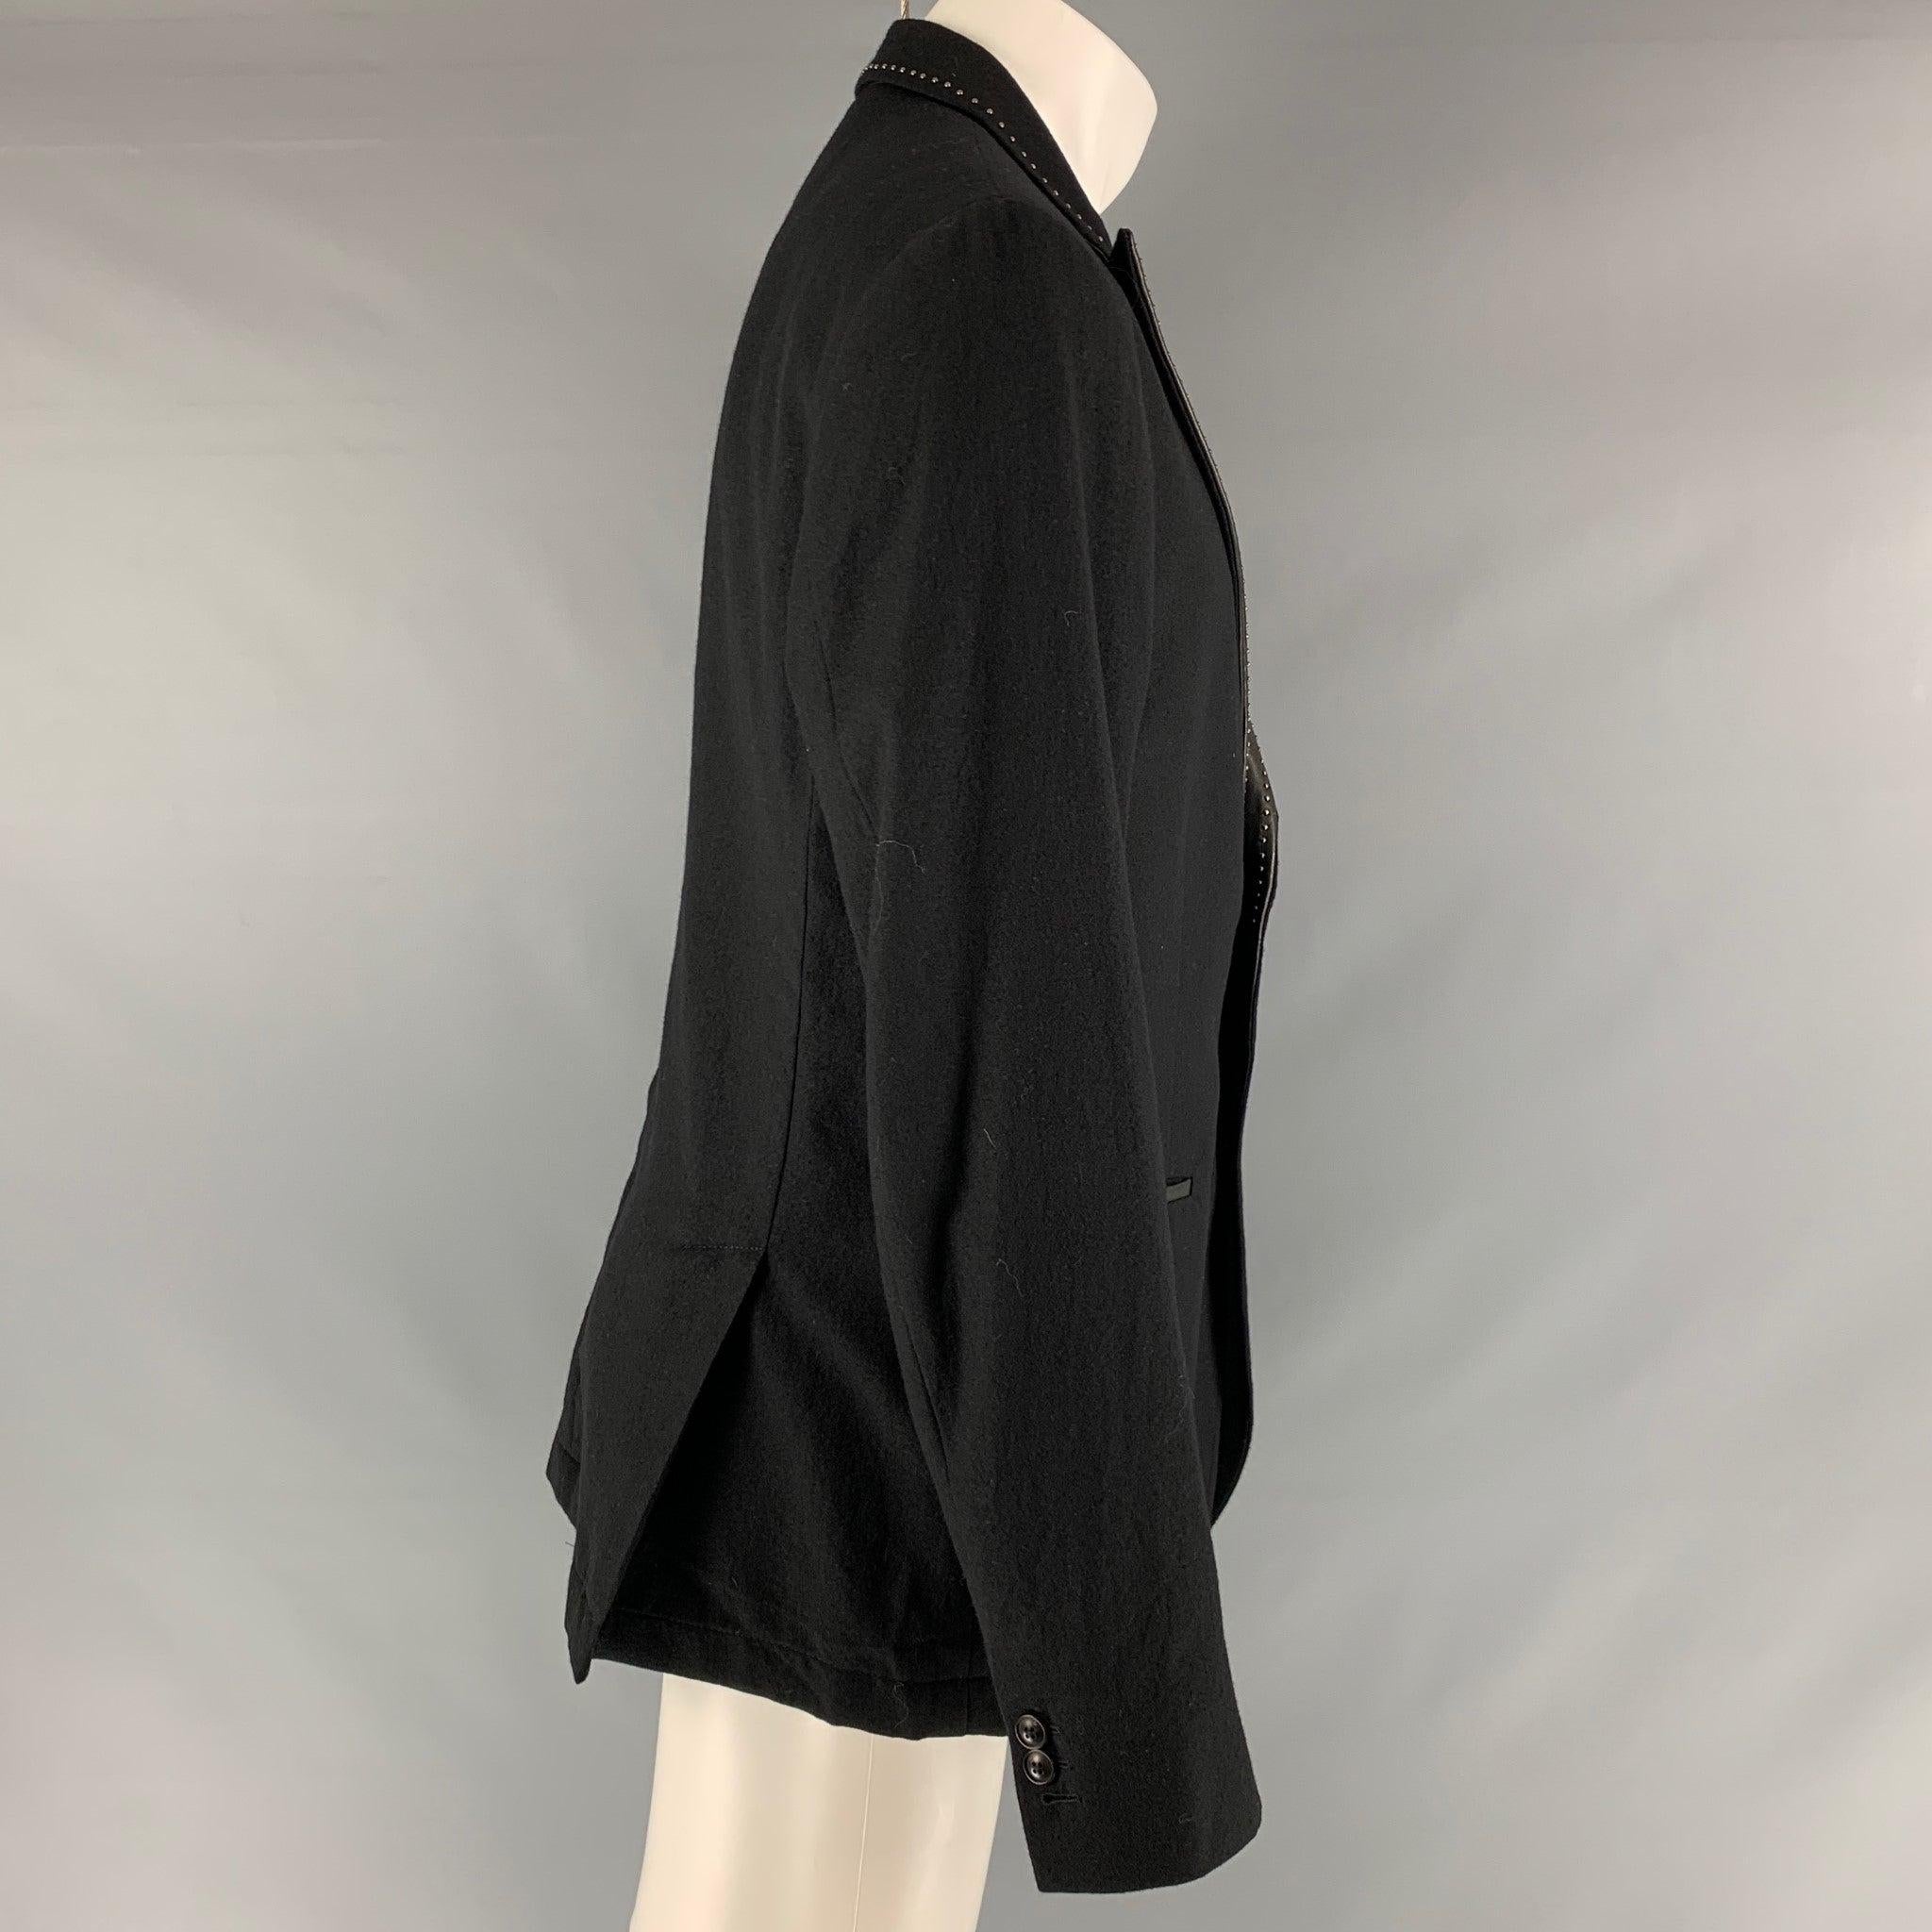 JOHN VARVATOS sport coat comes in a black wool woven material with a half liner featuring a peak lapel, studded lapel details, slit pockets, and a single button closure. Excellent Pre-Owned Condition. 

Marked:   54 

Measurements: 
 
Shoulder: 18.5